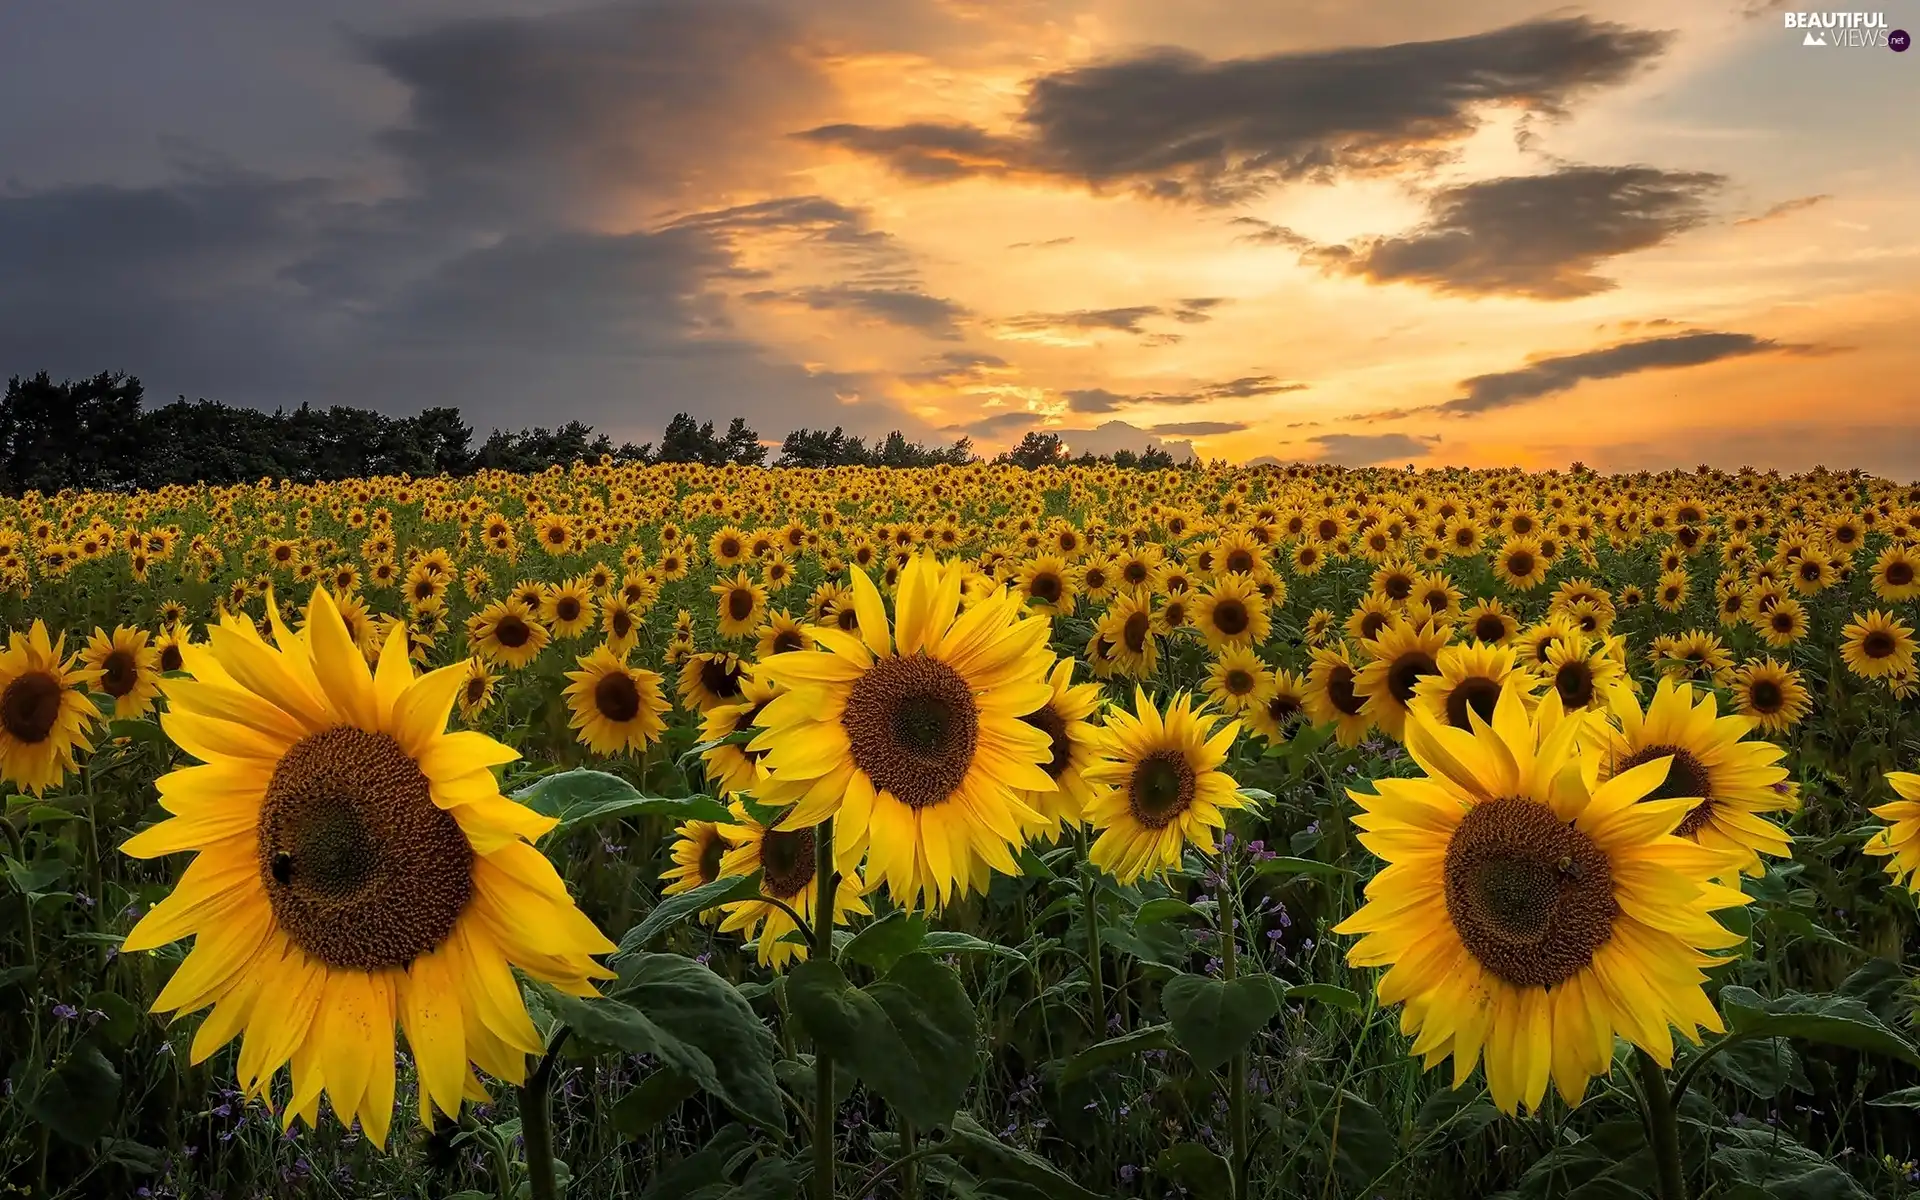 trees, Field, clouds, Great Sunsets, viewes, Nice sunflowers